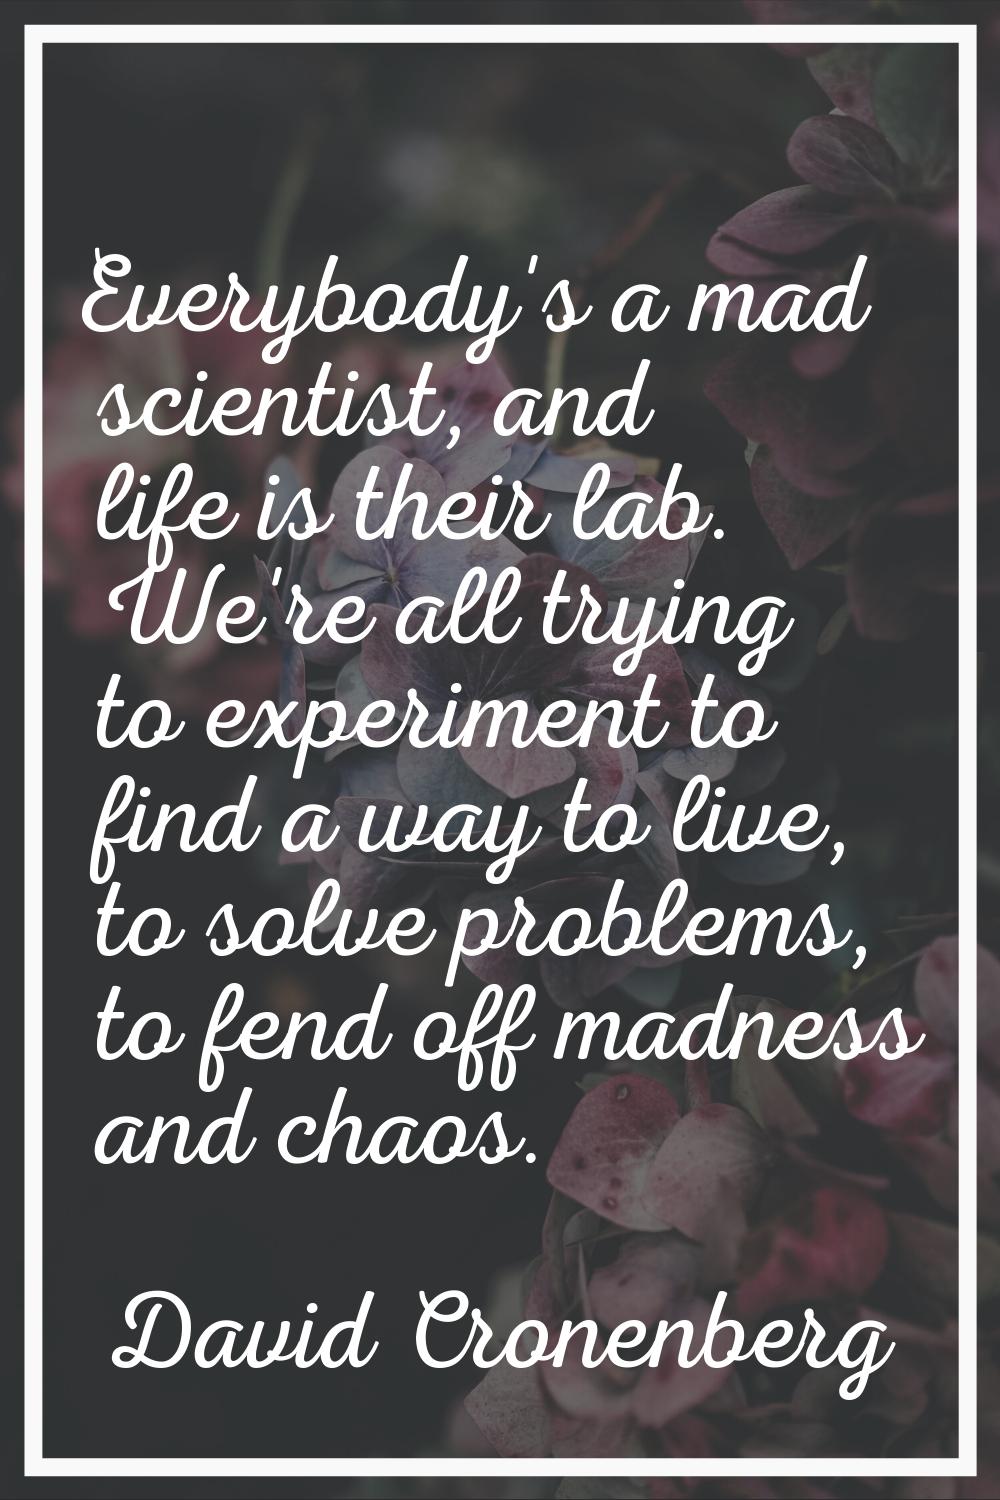 Everybody's a mad scientist, and life is their lab. We're all trying to experiment to find a way to